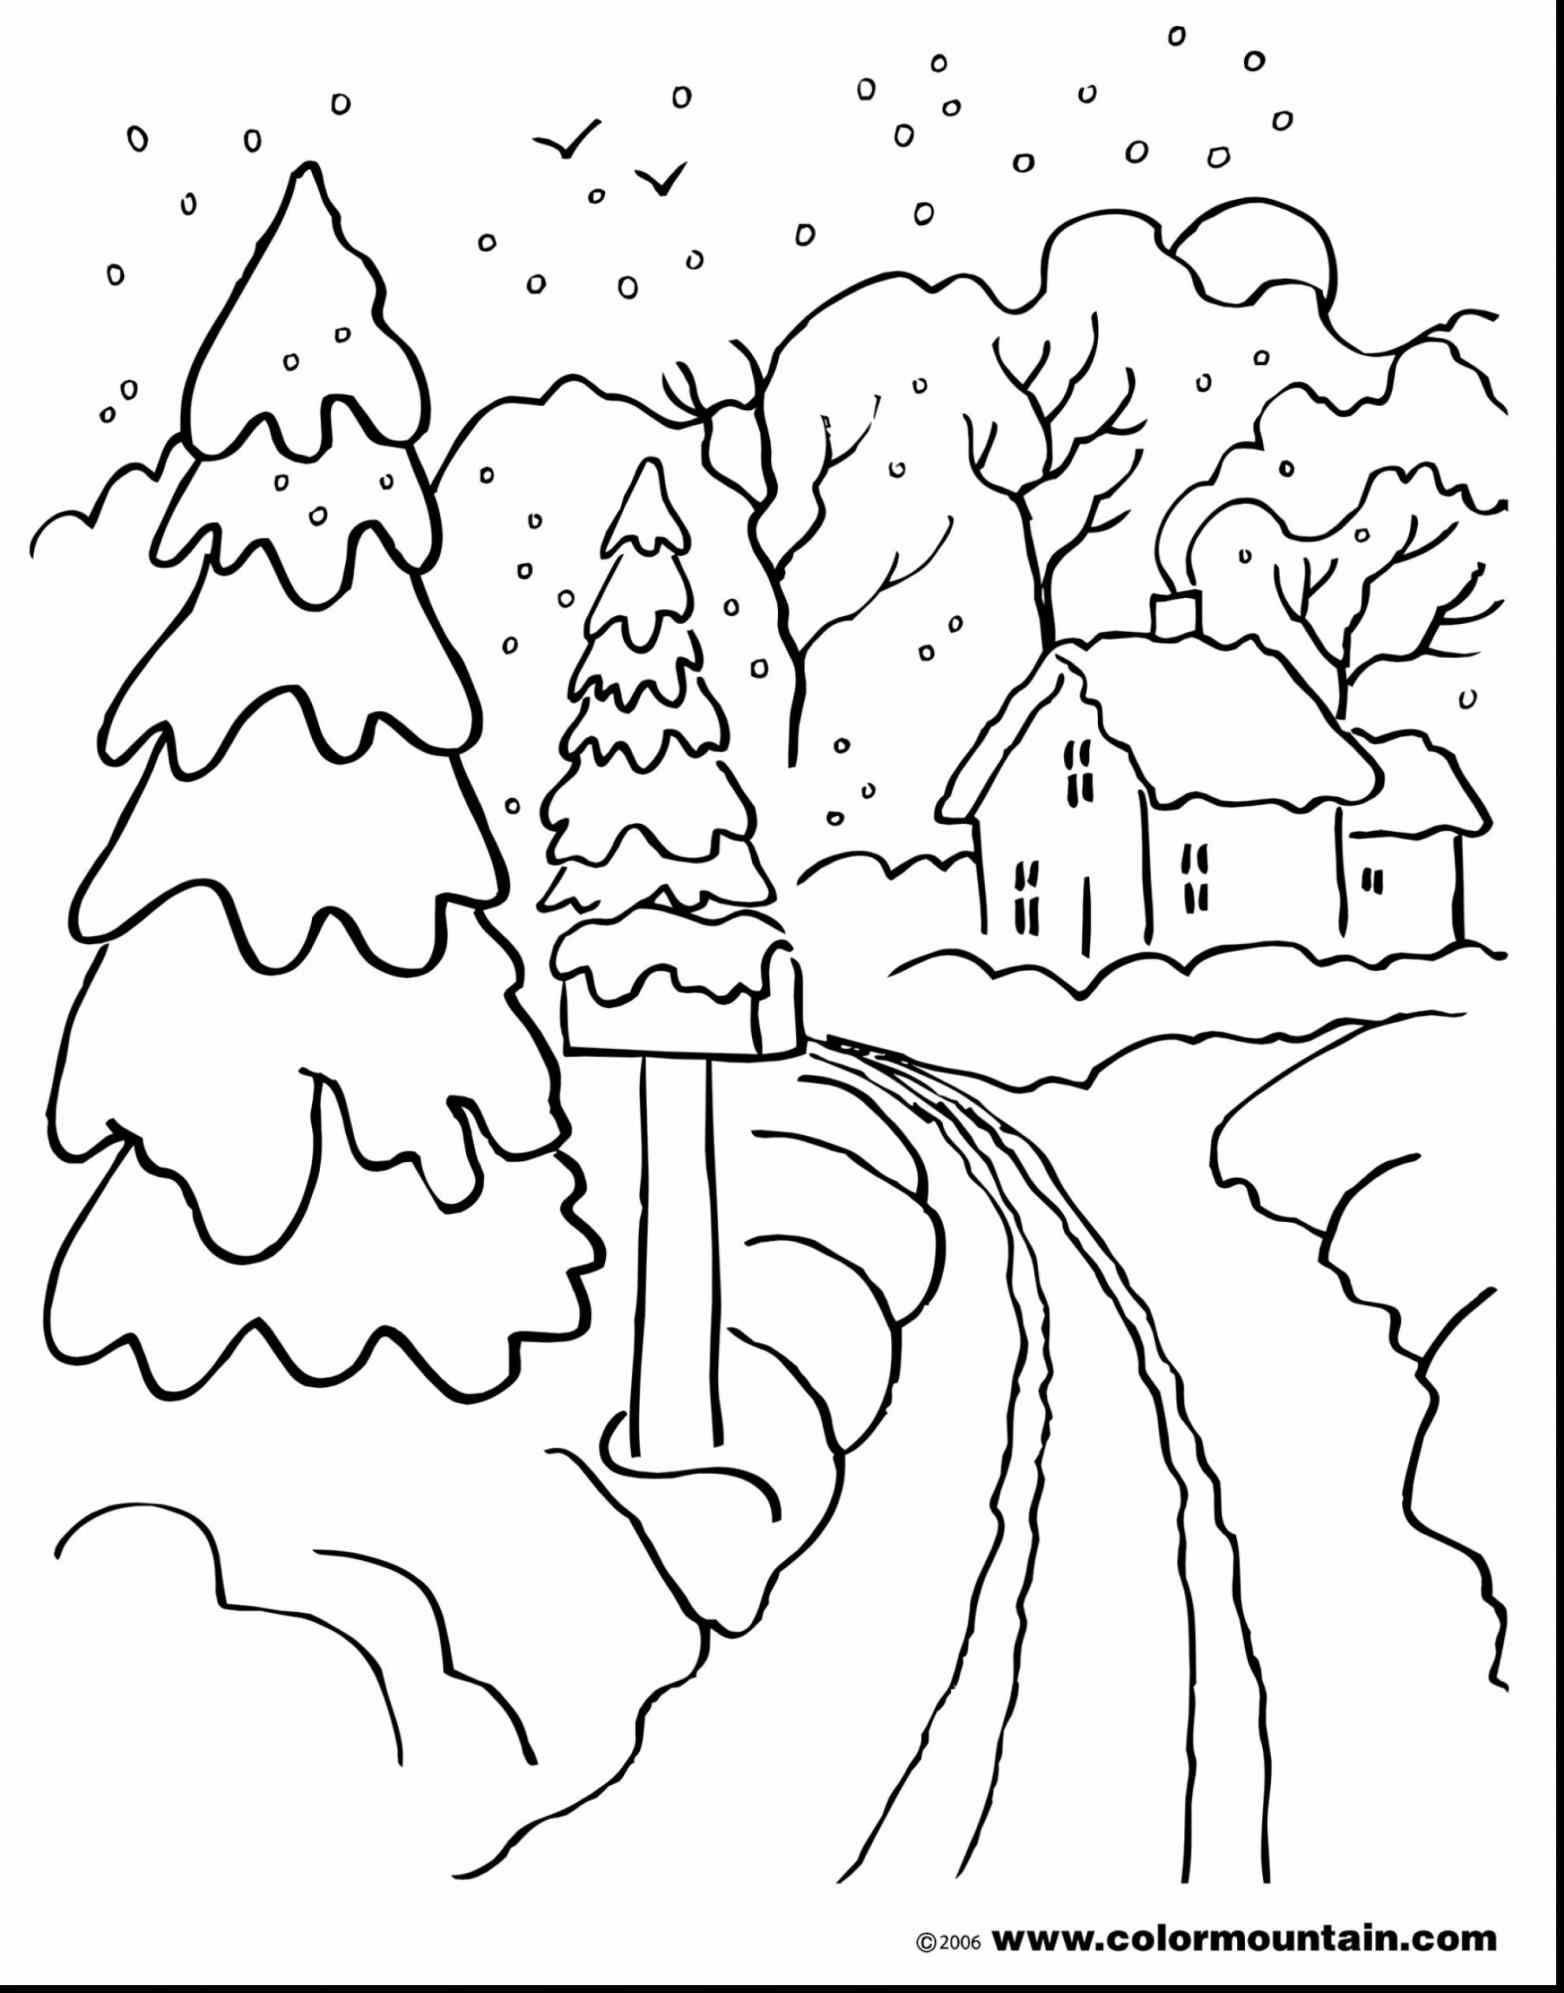 Free Printable Landscape Coloring Pages For Adults at